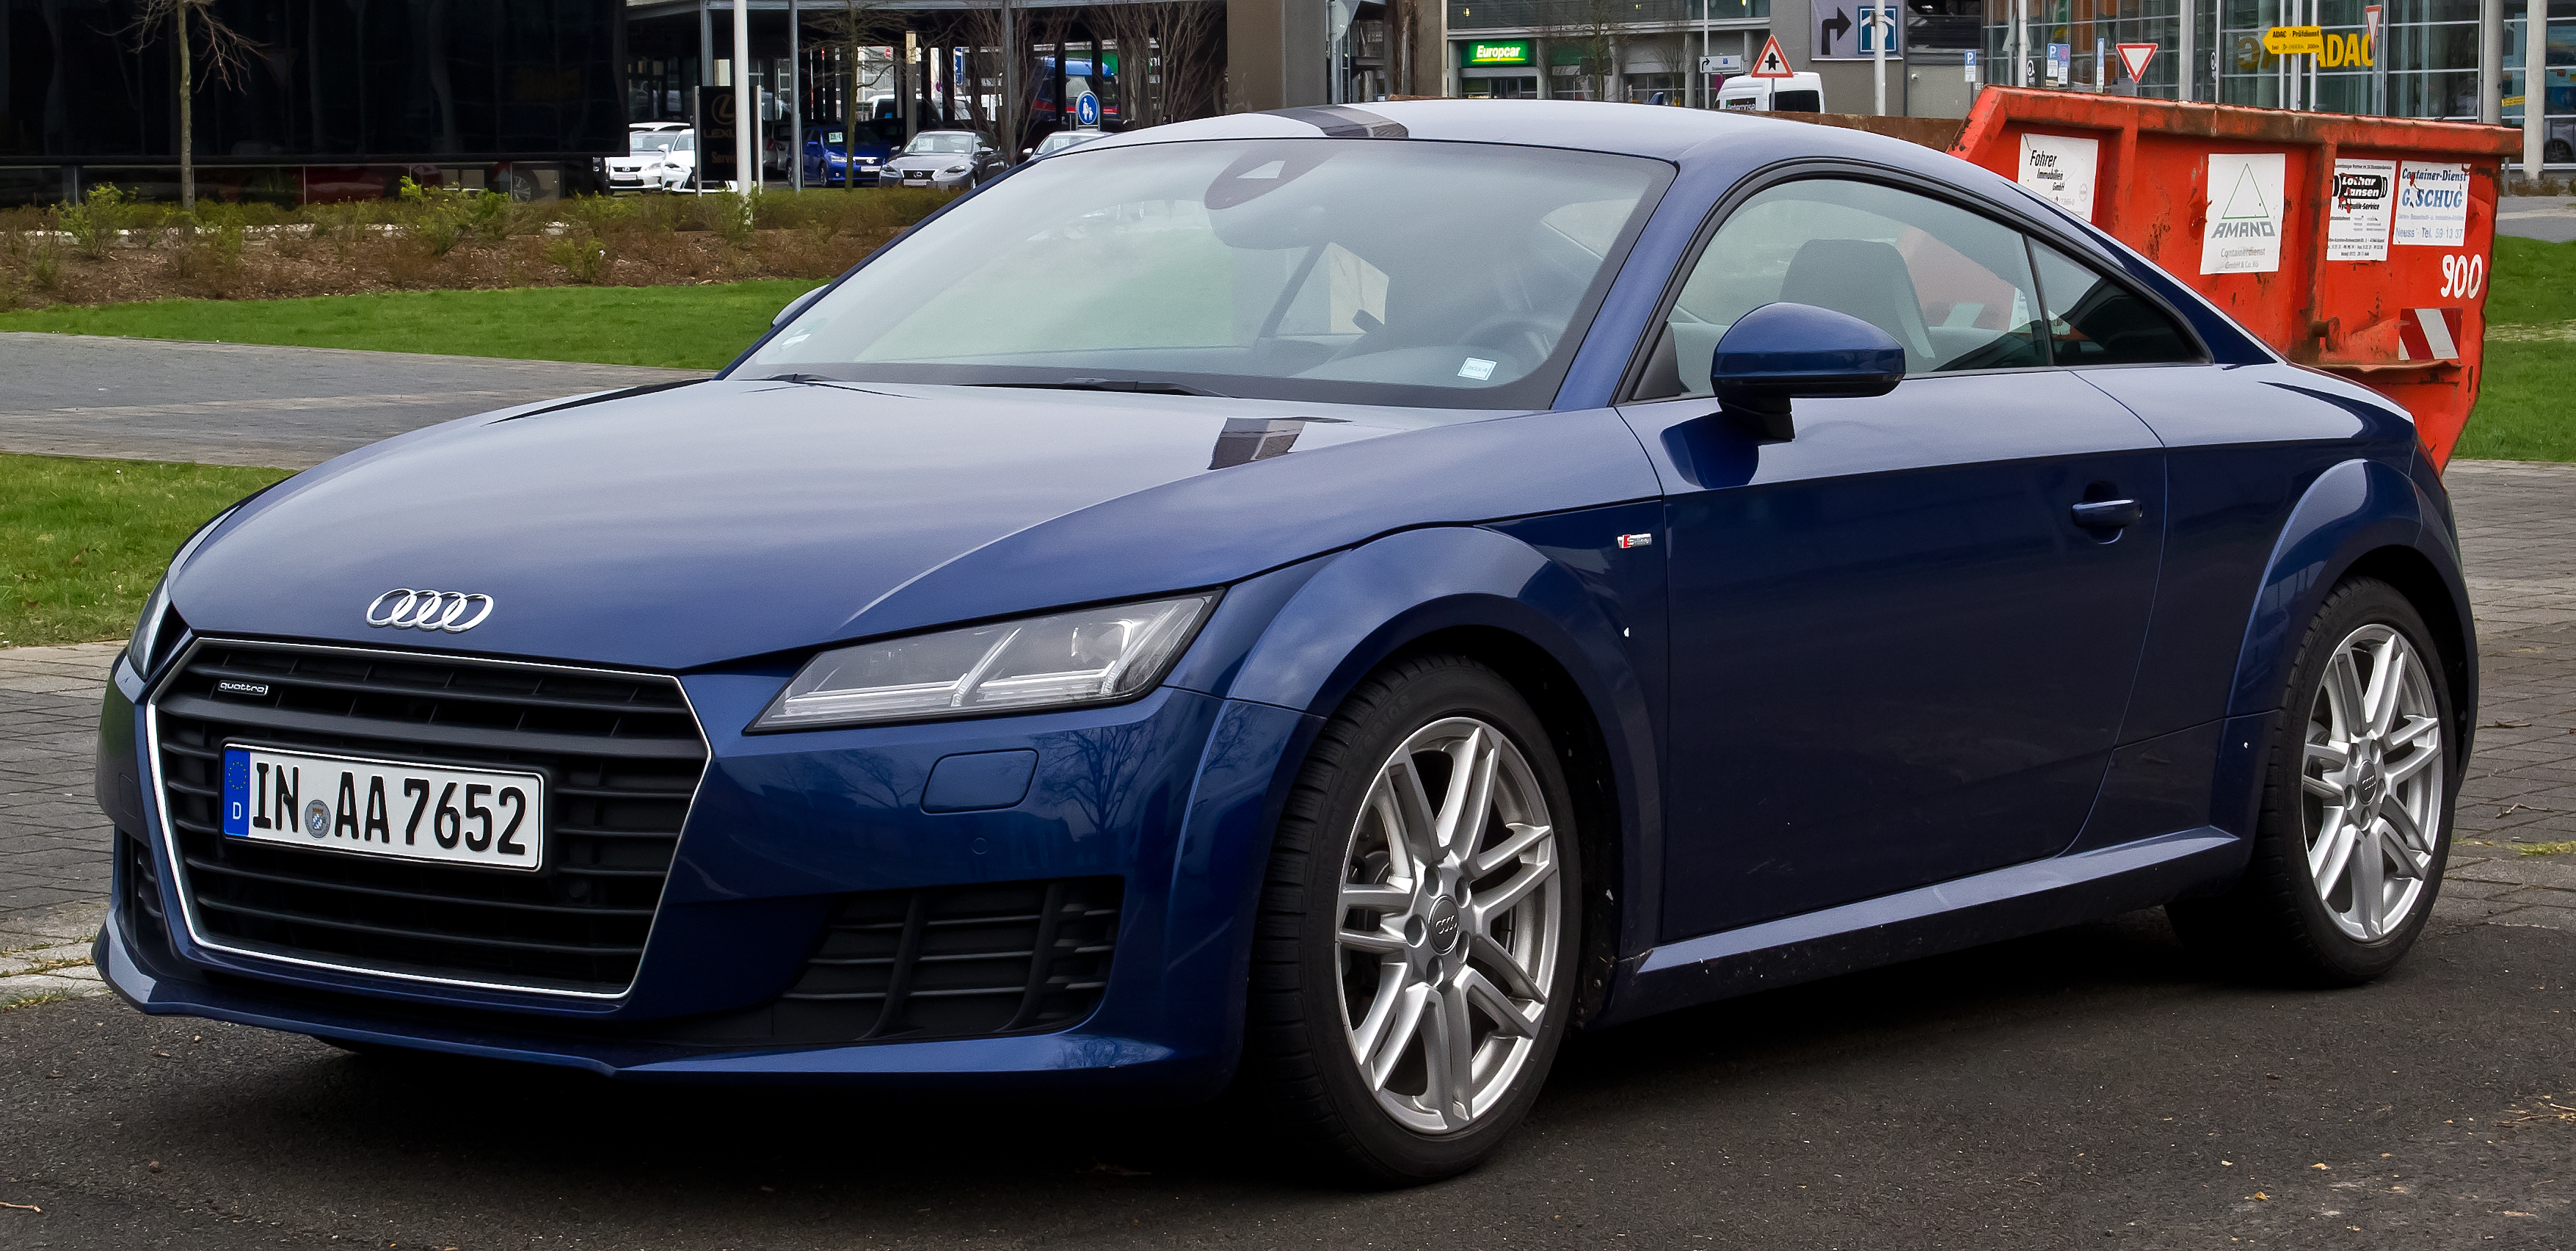 Here Are The Audi TT Years To Avoid - CoPilot